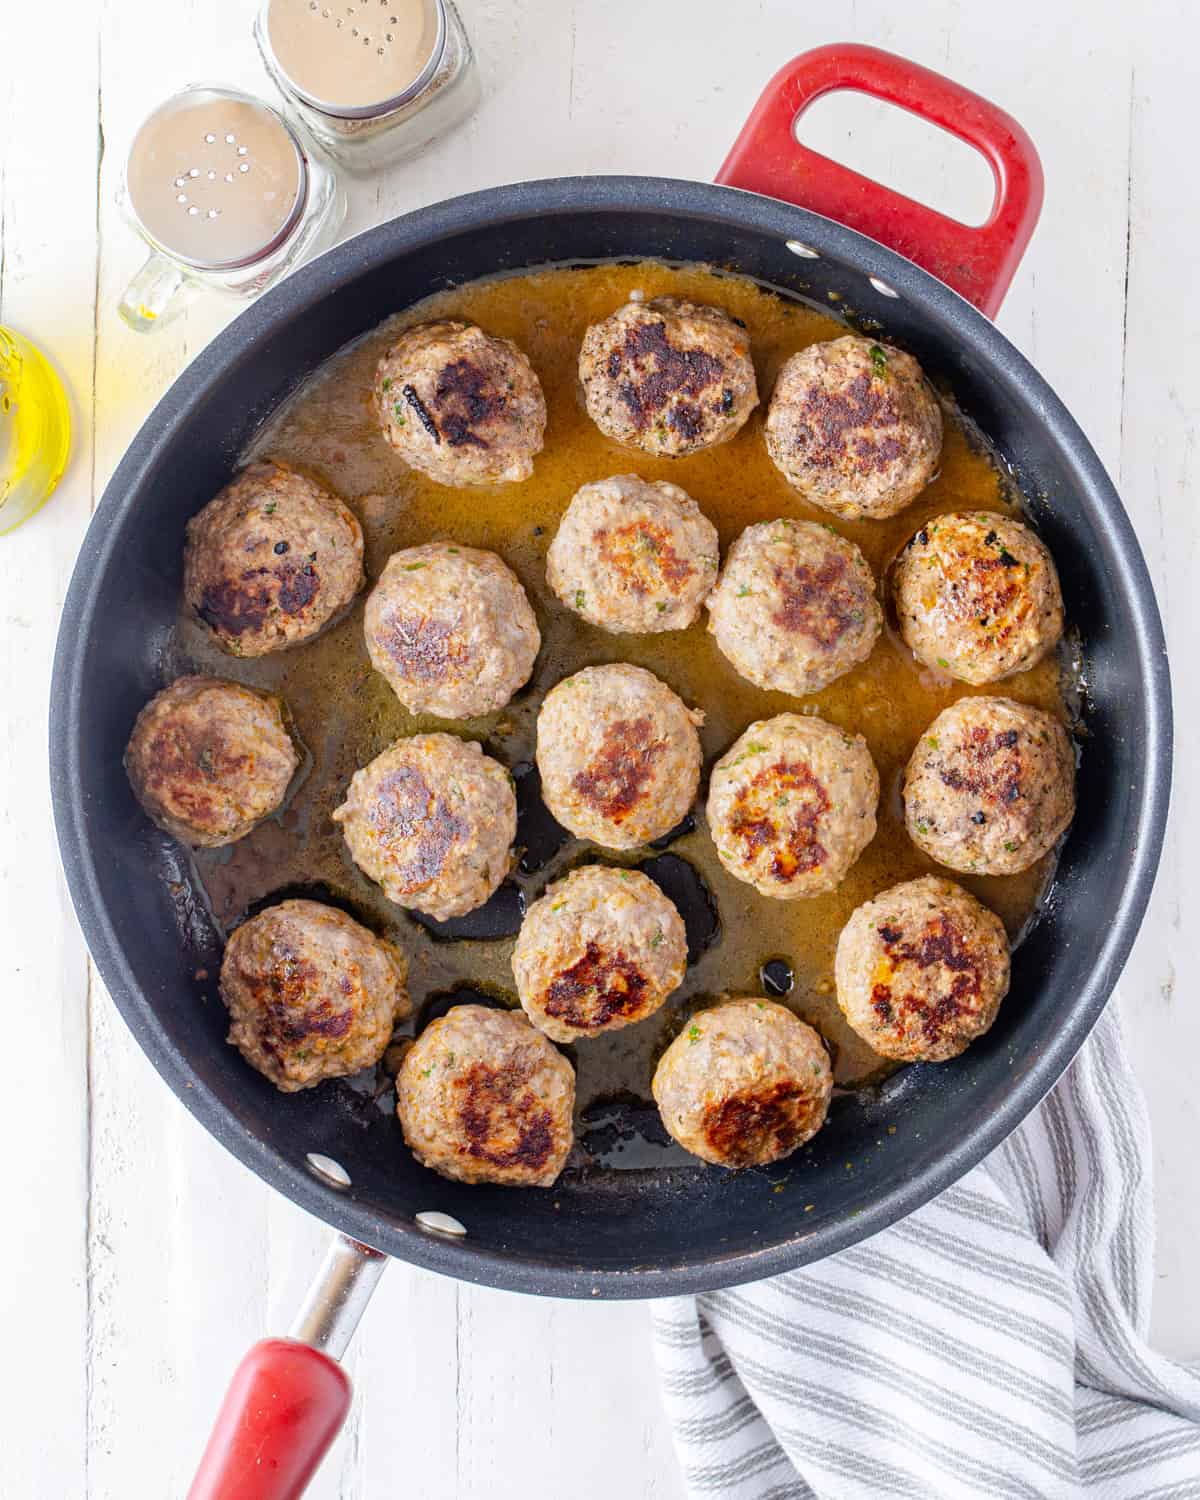 Cooking Italian meatballs in a large pan